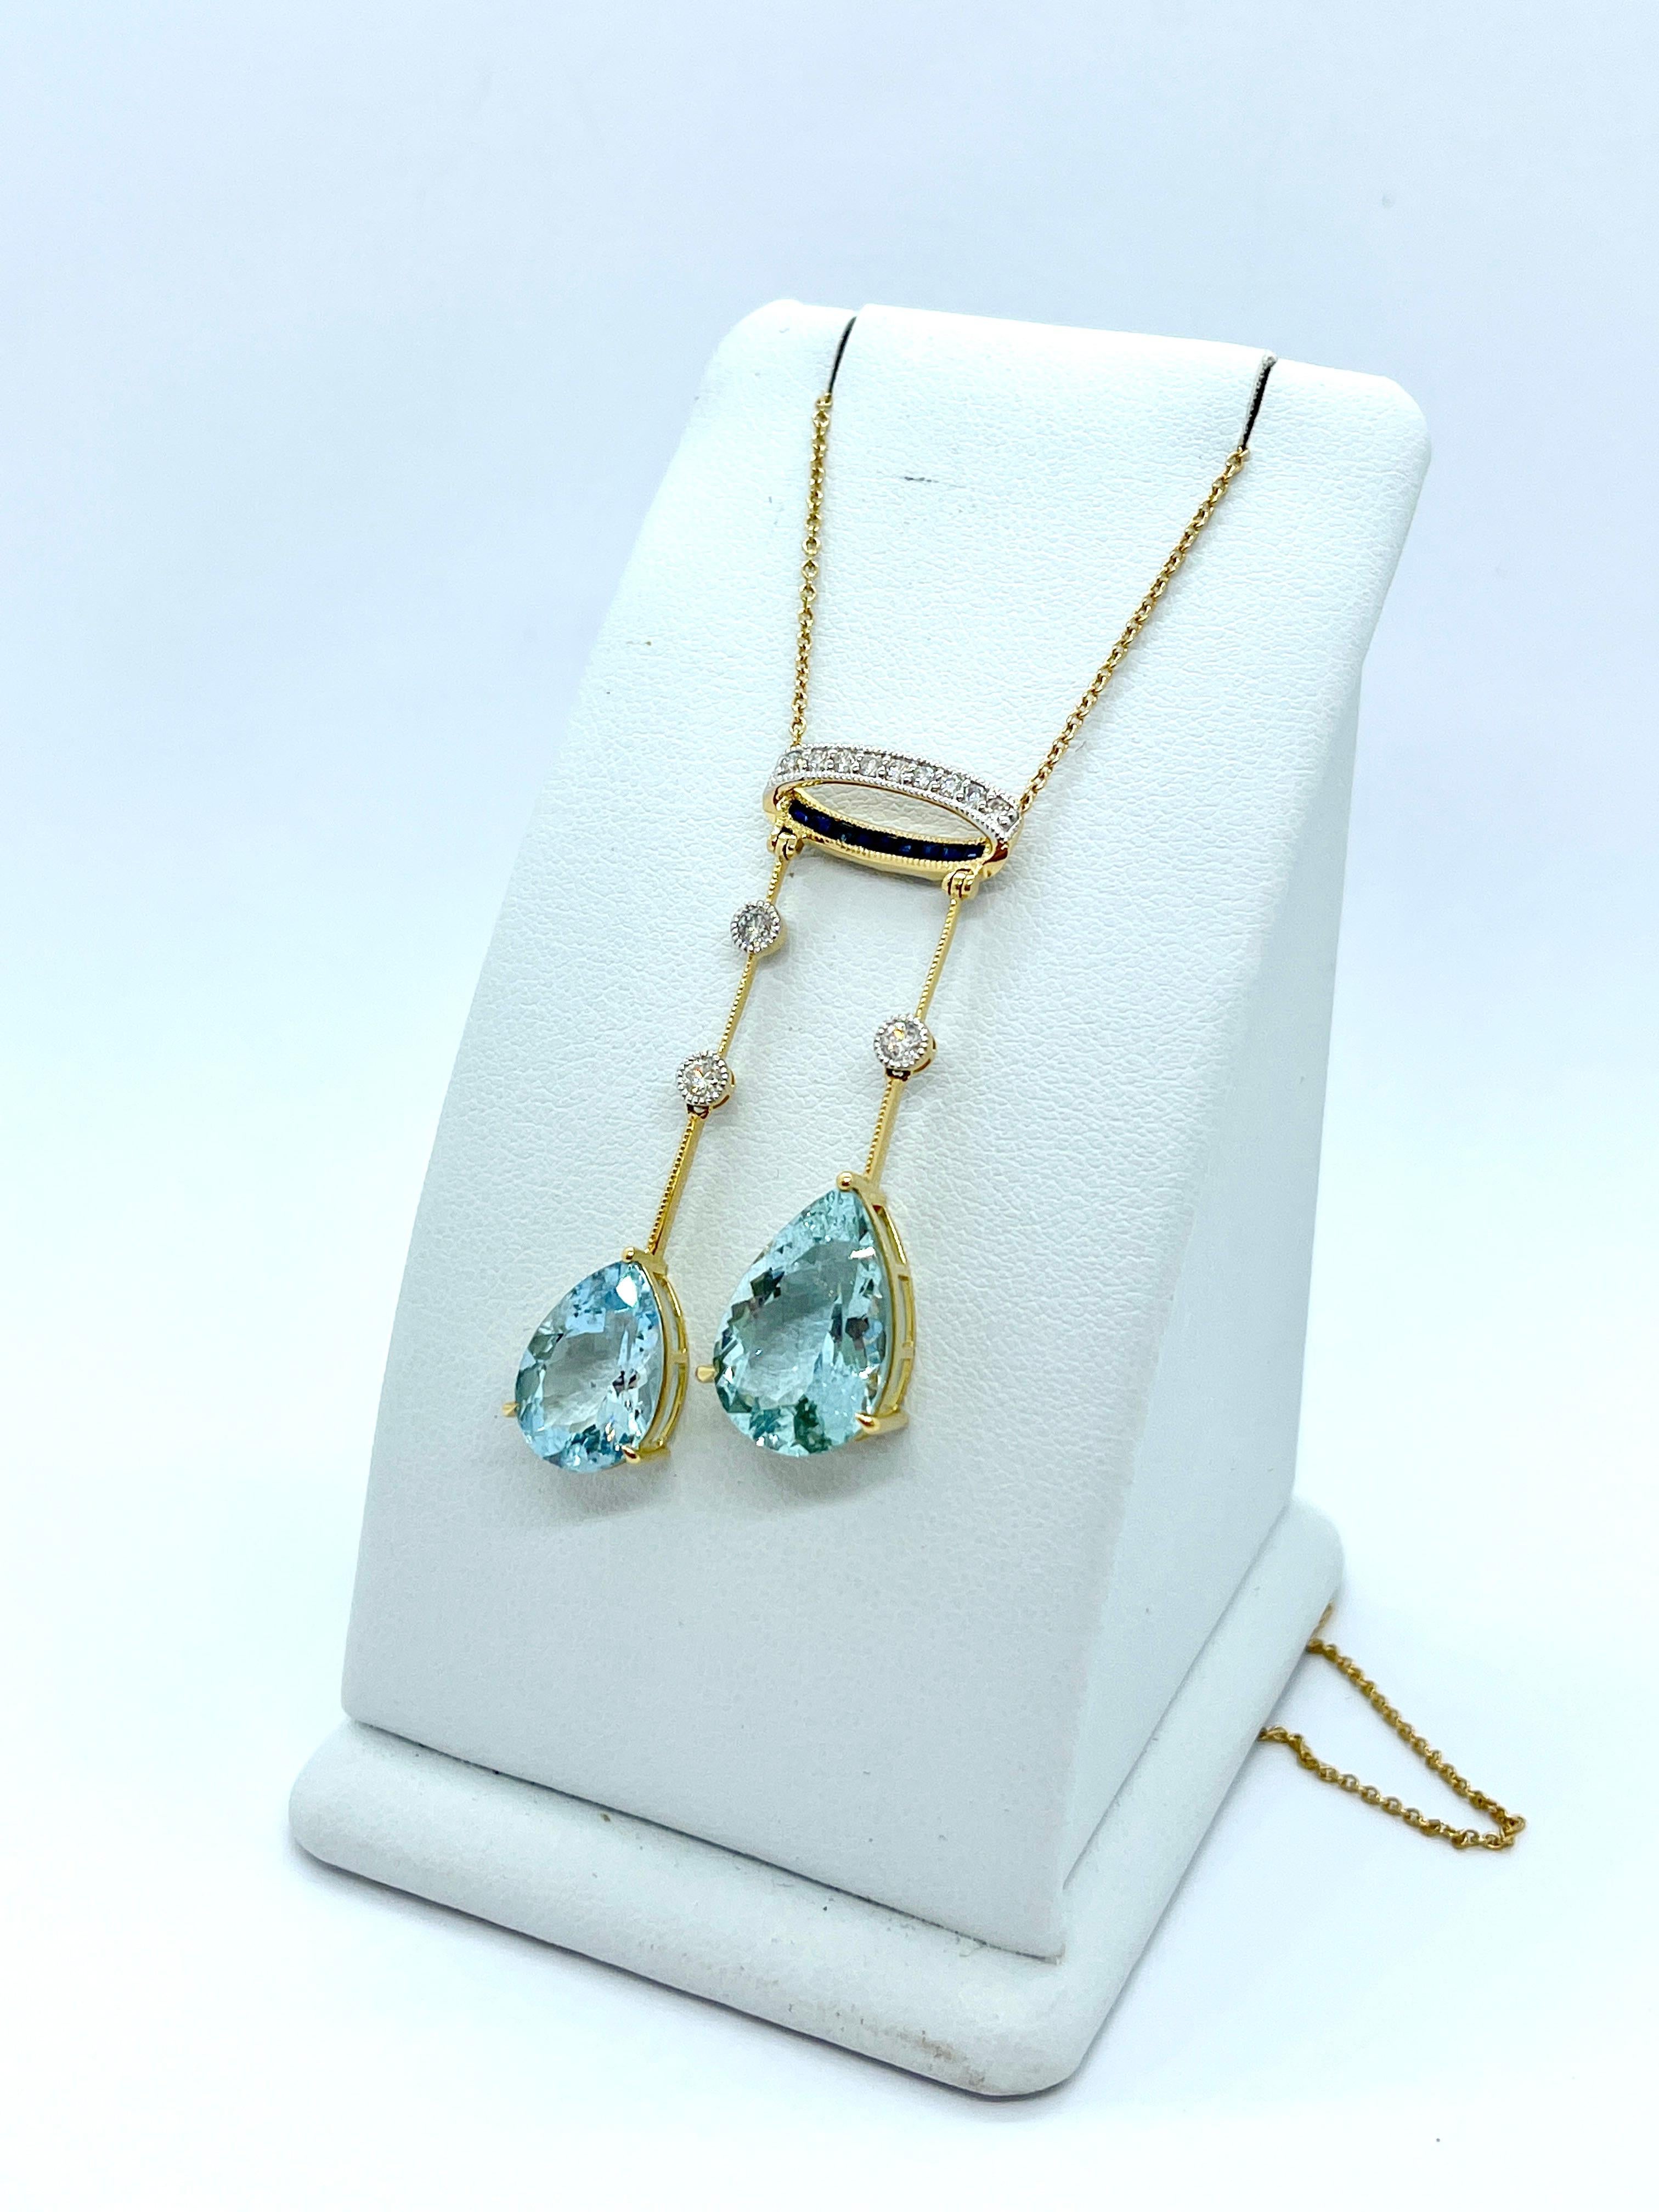 We Proudly Present this Beautiful Necklace

This stunning Aquamarine drop pendant is set with 2 x Natural Pear Shaped Aquarmarine, Diamonds and Blue Sapphires.

The Aquamarine dangle elegantly from a rounded mount that is reminiscent of a small